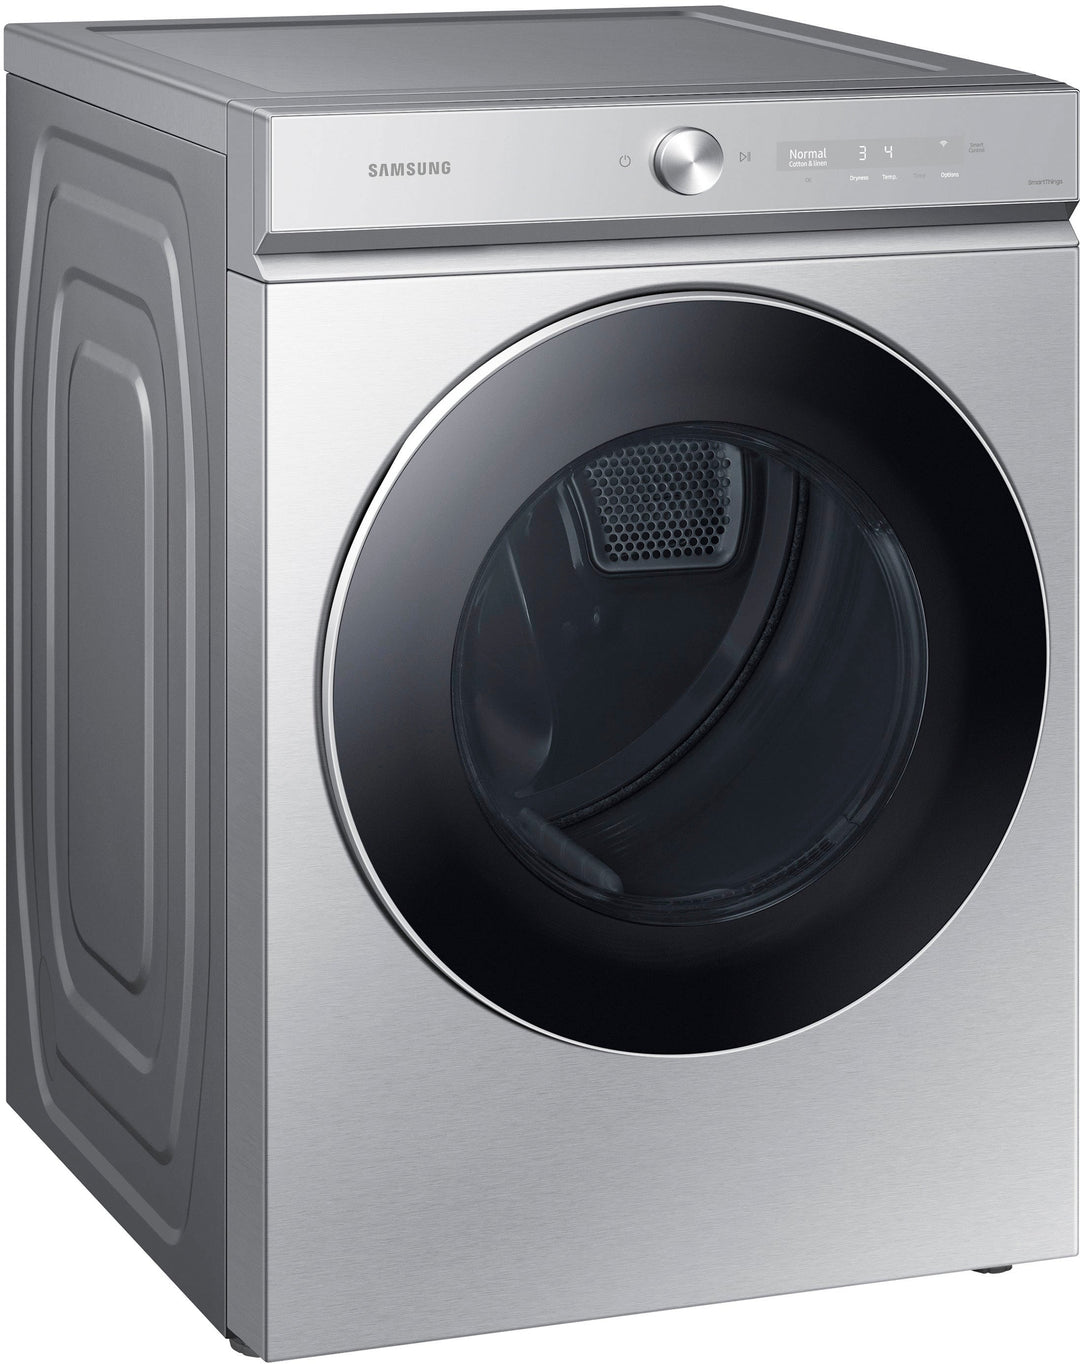 Samsung - Bespoke 7.6 cu. ft. Ultra Capacity Electric Dryer with AI Optimal Dry and Super Speed Dry - Silver steel_3